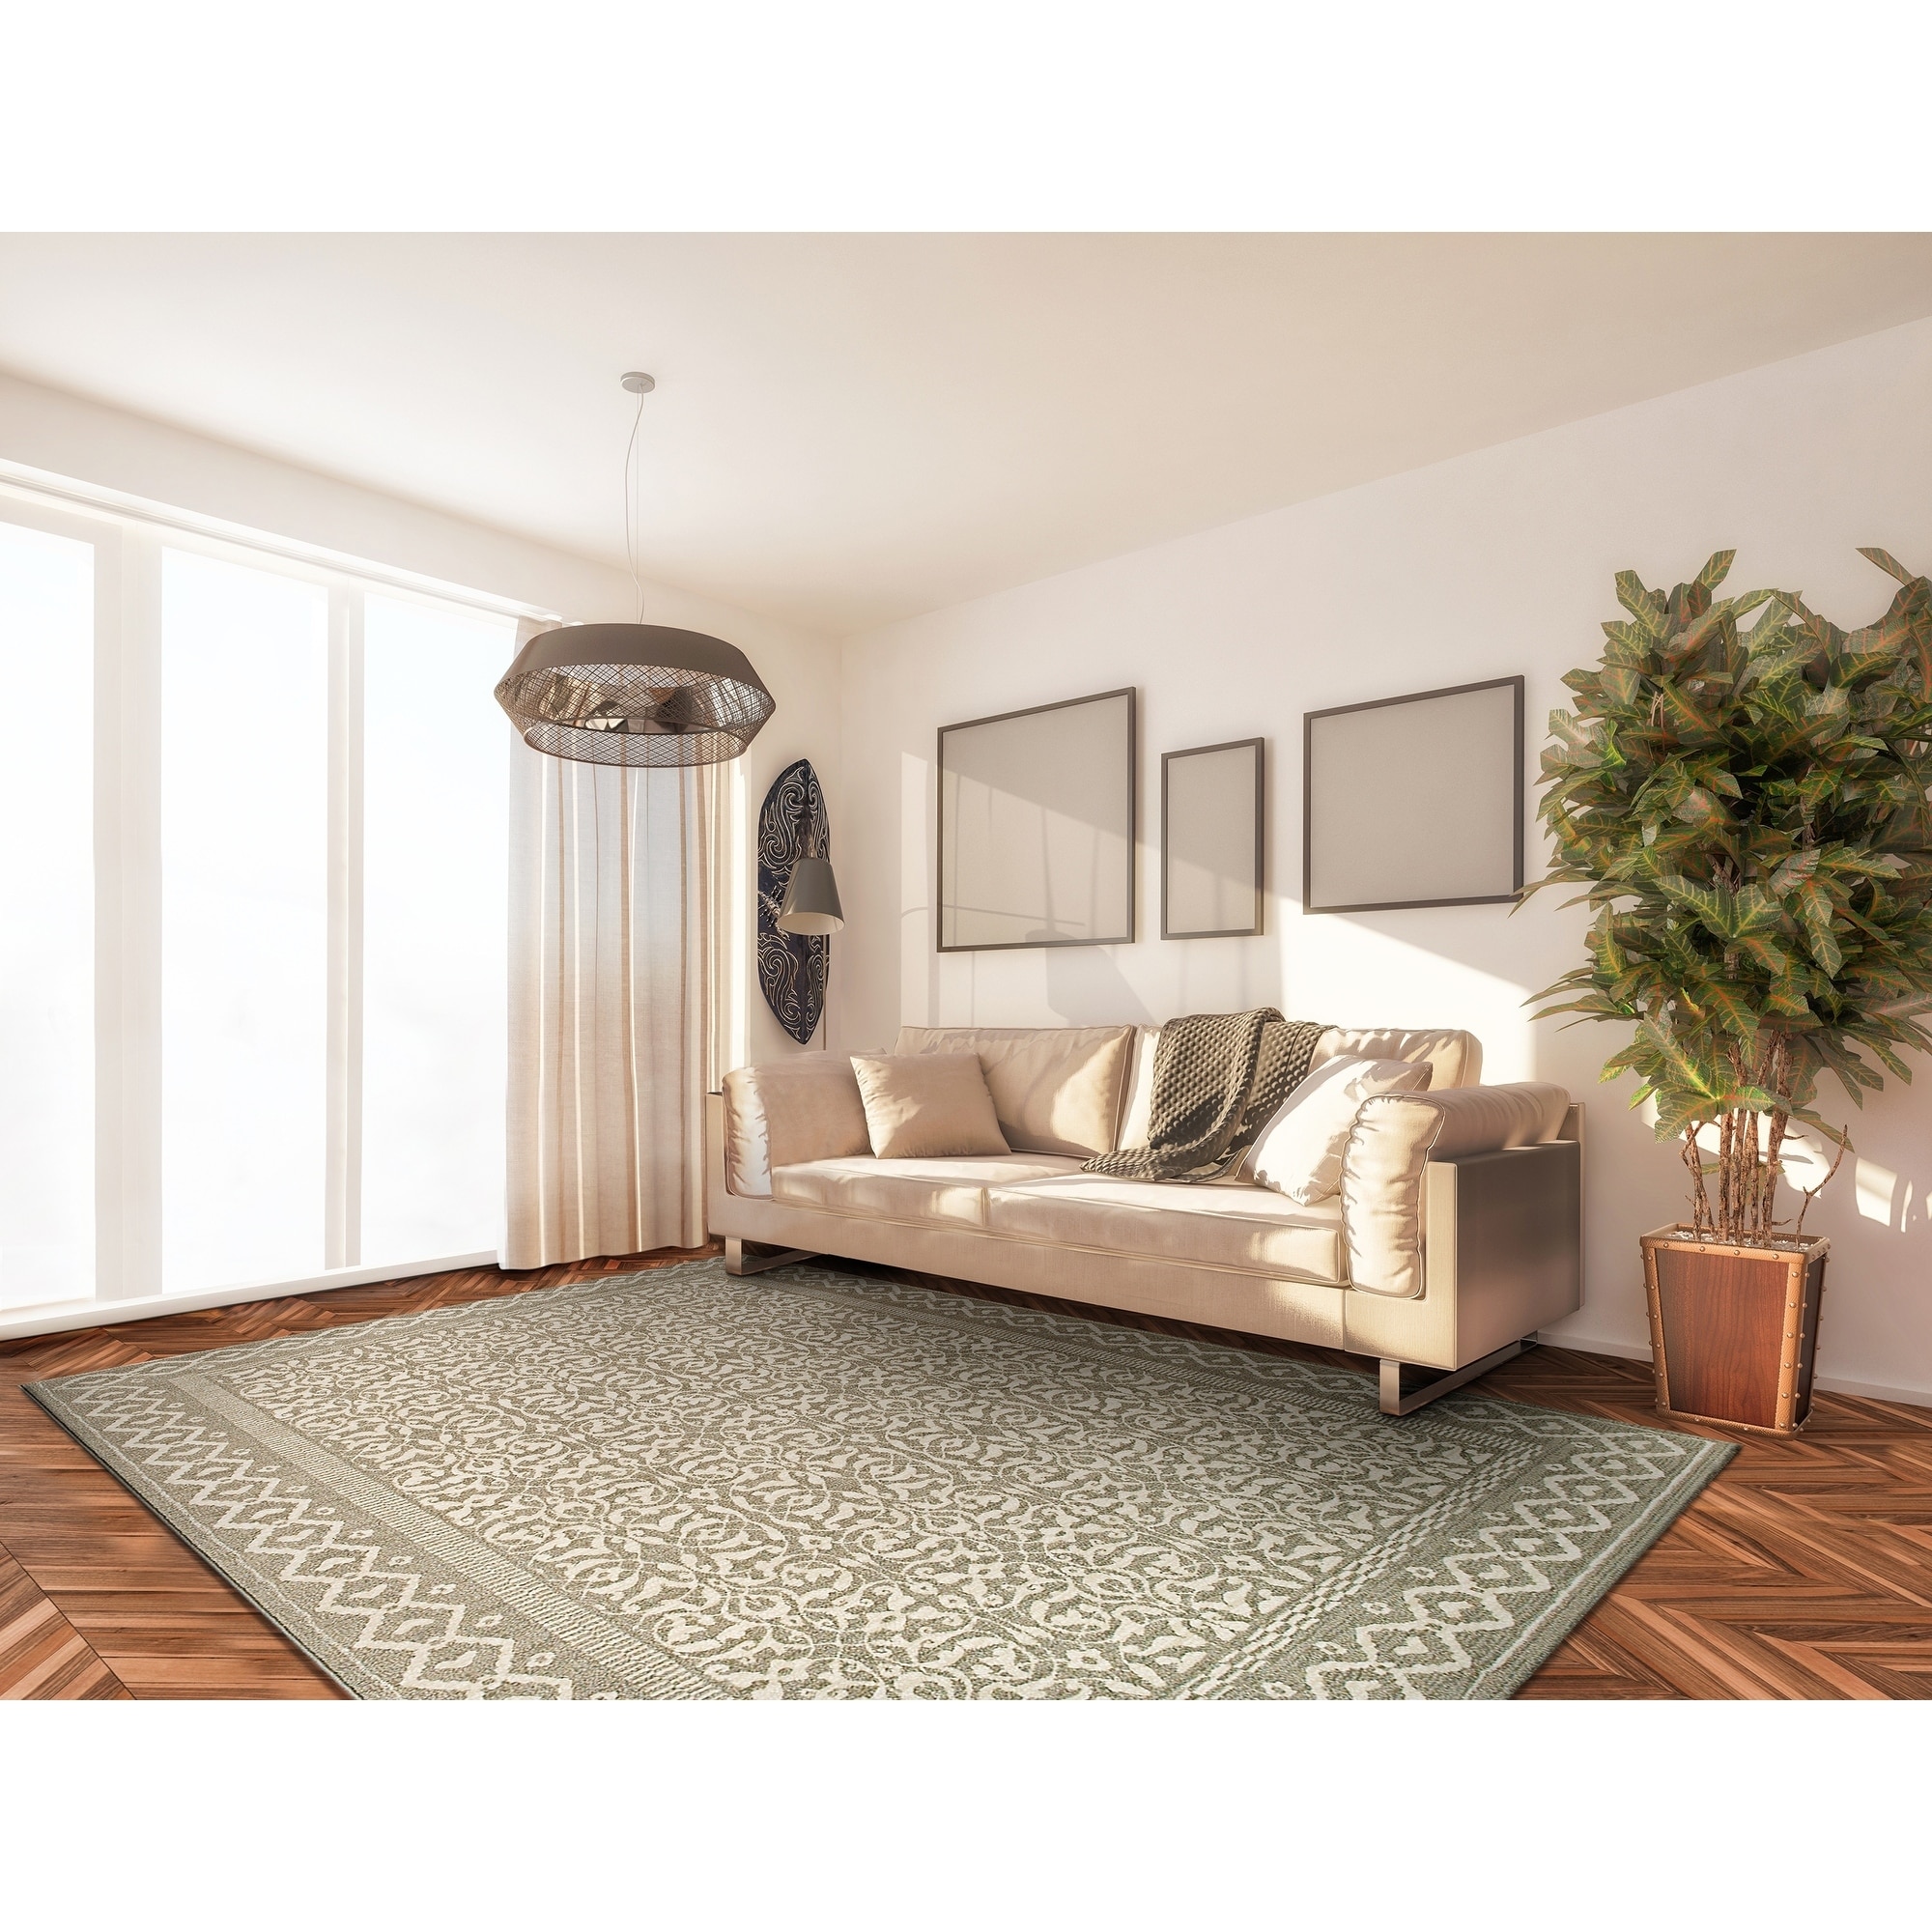 Marina Ibiza/ Oyster Area Rug (311 X 56) (OysterSecondary Colors PearlPattern FloralTip We recommend the use of a non skid pad to keep the rug in place on smooth surfaces.All rug sizes are approximate. Due to the difference of monitor colors, some rug 